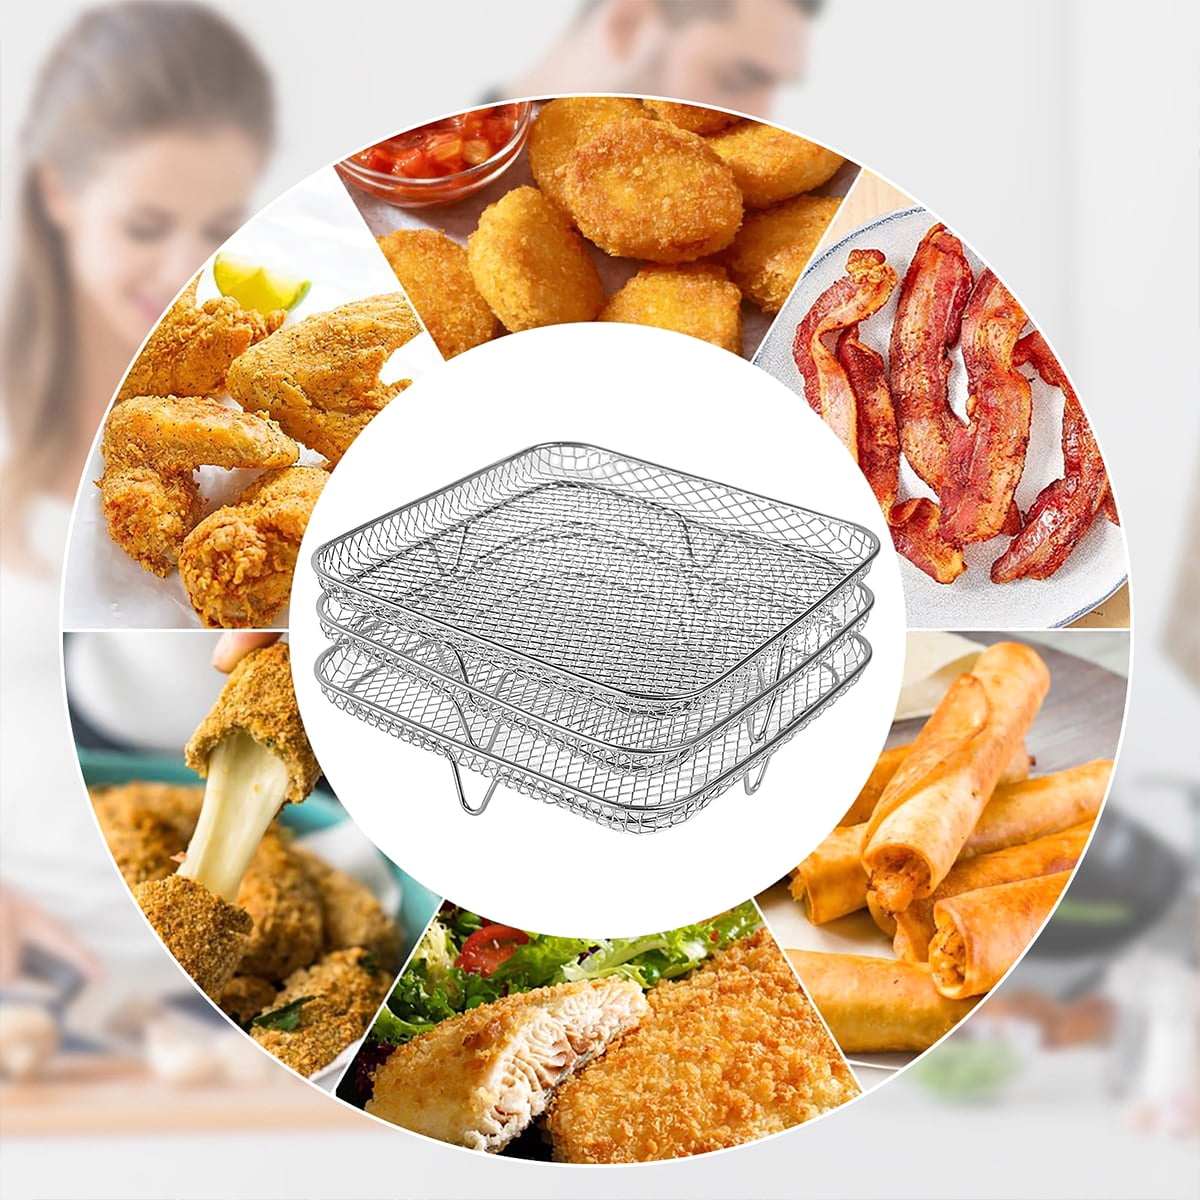 Square Air Fryer Basket 6QT for Gowise USA Power Ninja COSORI Chefman Air  Fryer Oven,Air Fryer Oven Accessory,Fry Basket - AliExpress